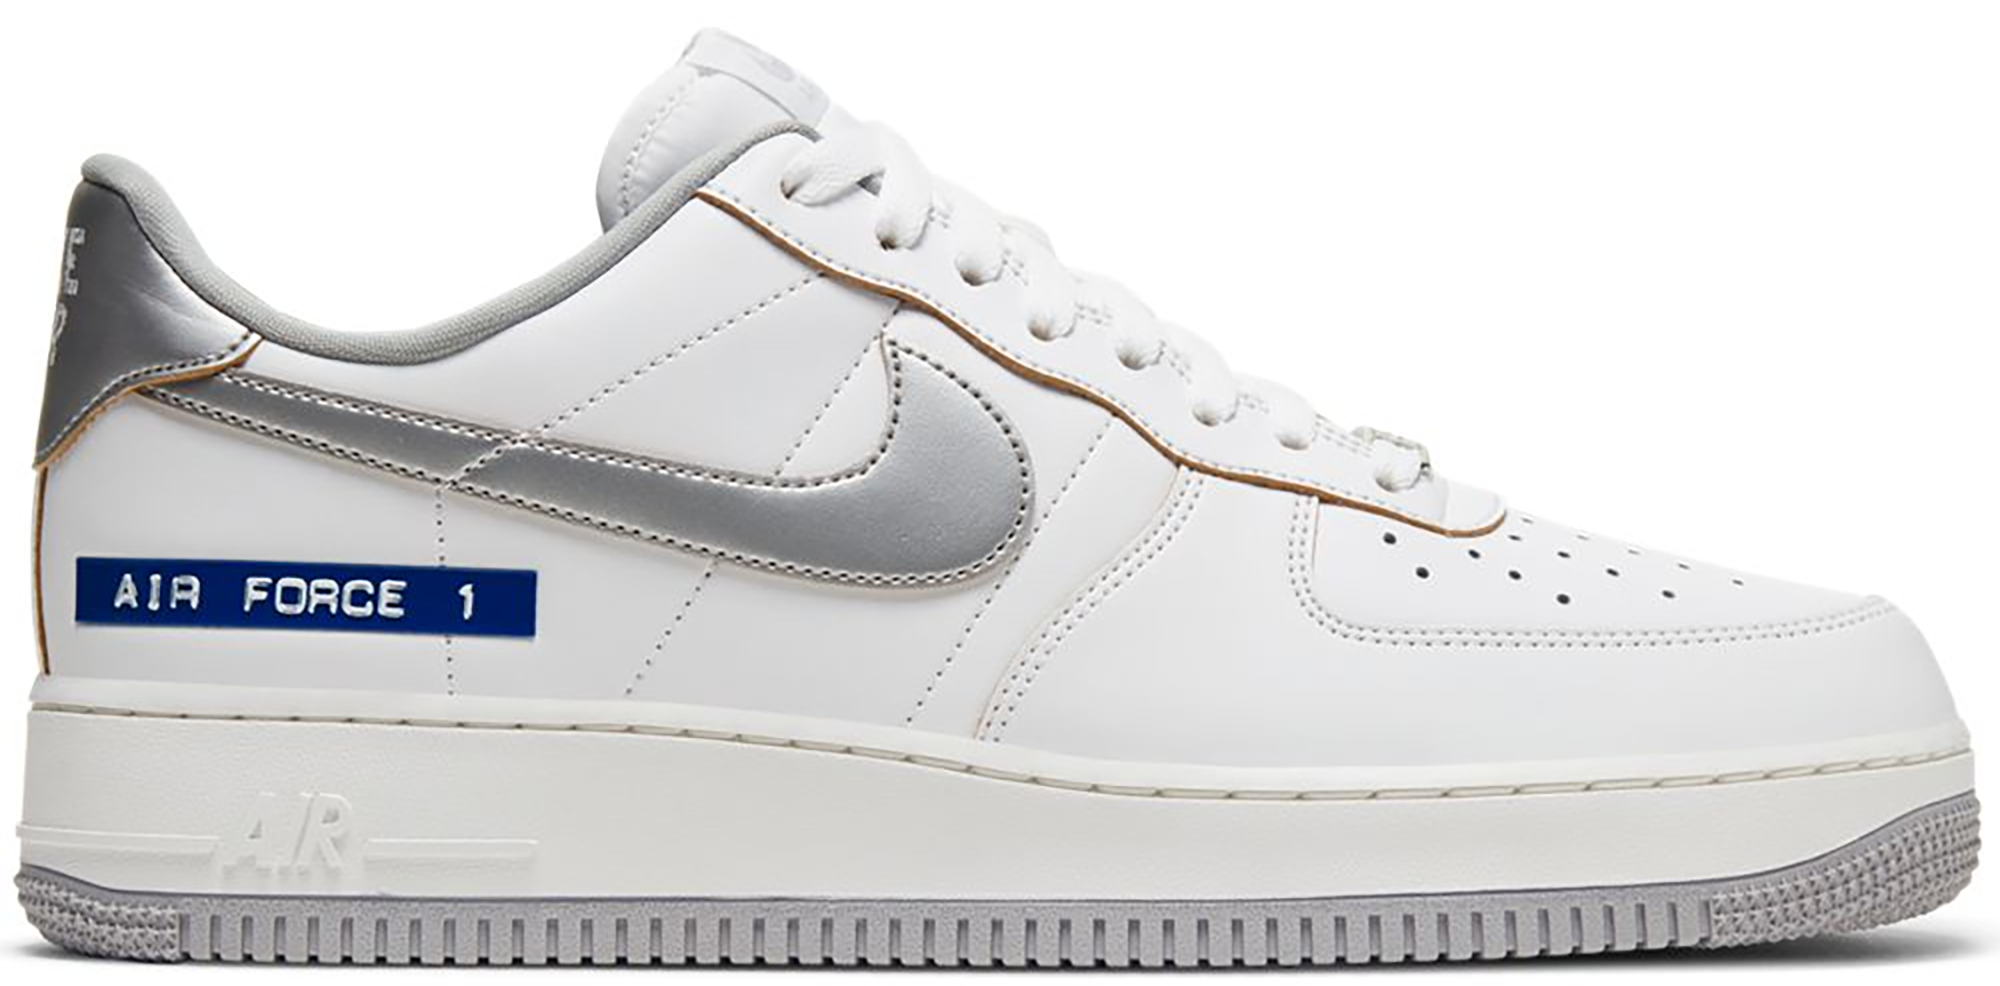 Nike Air Force 1 Low Label Maker White 